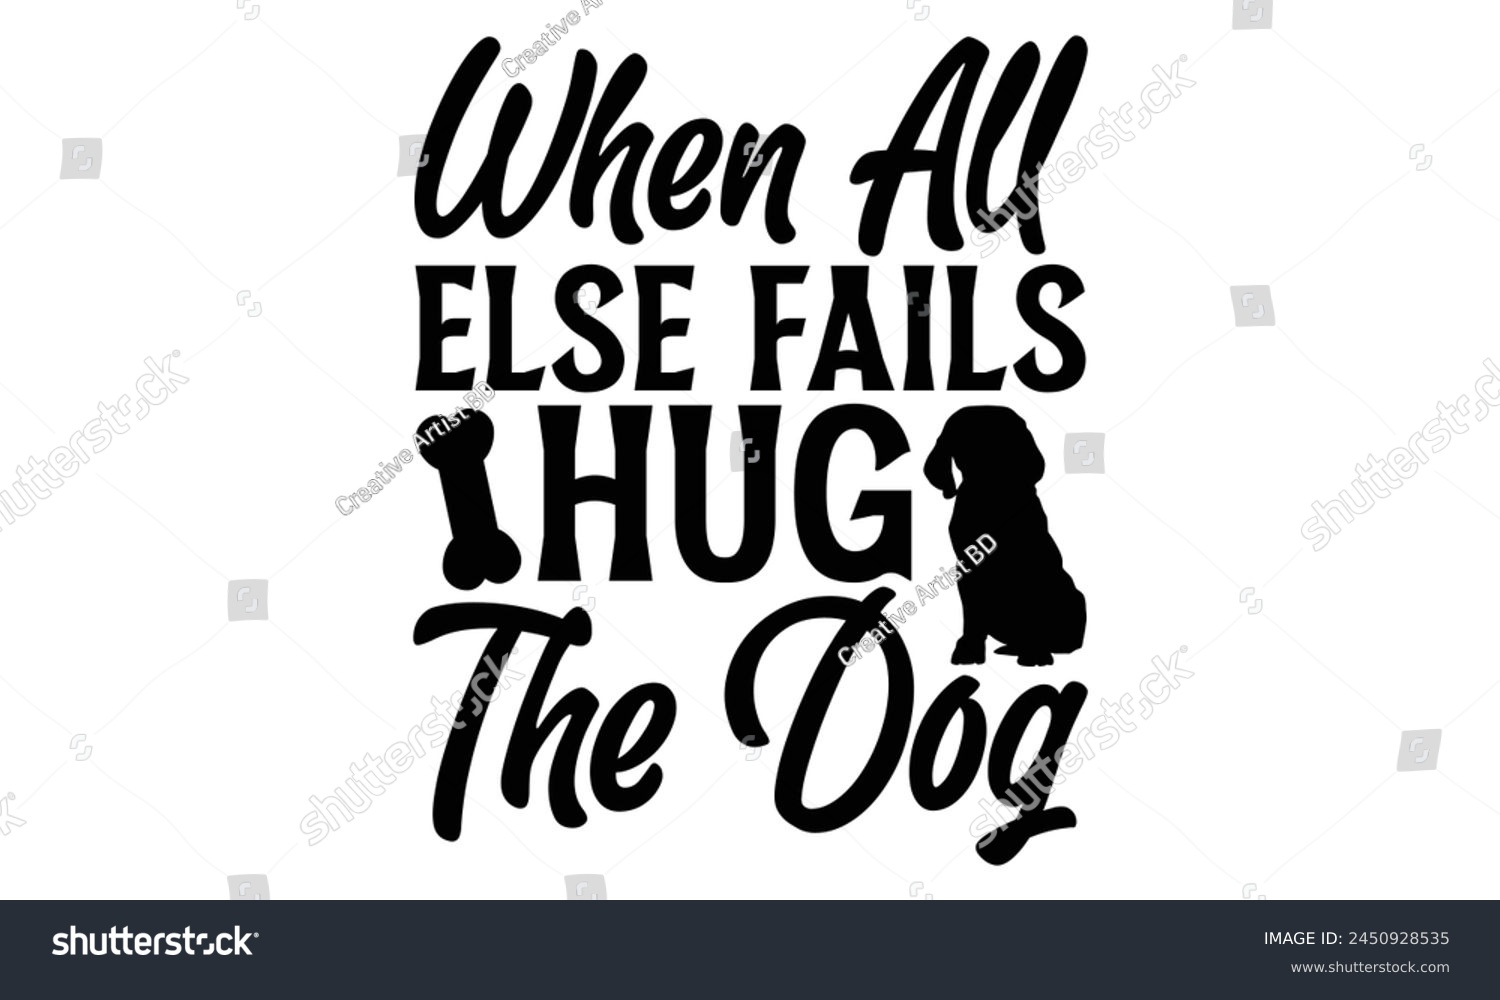 SVG of When All Else Fails Hug The Dog - Dog T shirt Design, Handmade calligraphy vector illustration, Cutting and Silhouette, for prints on bags, cups, card, posters. svg